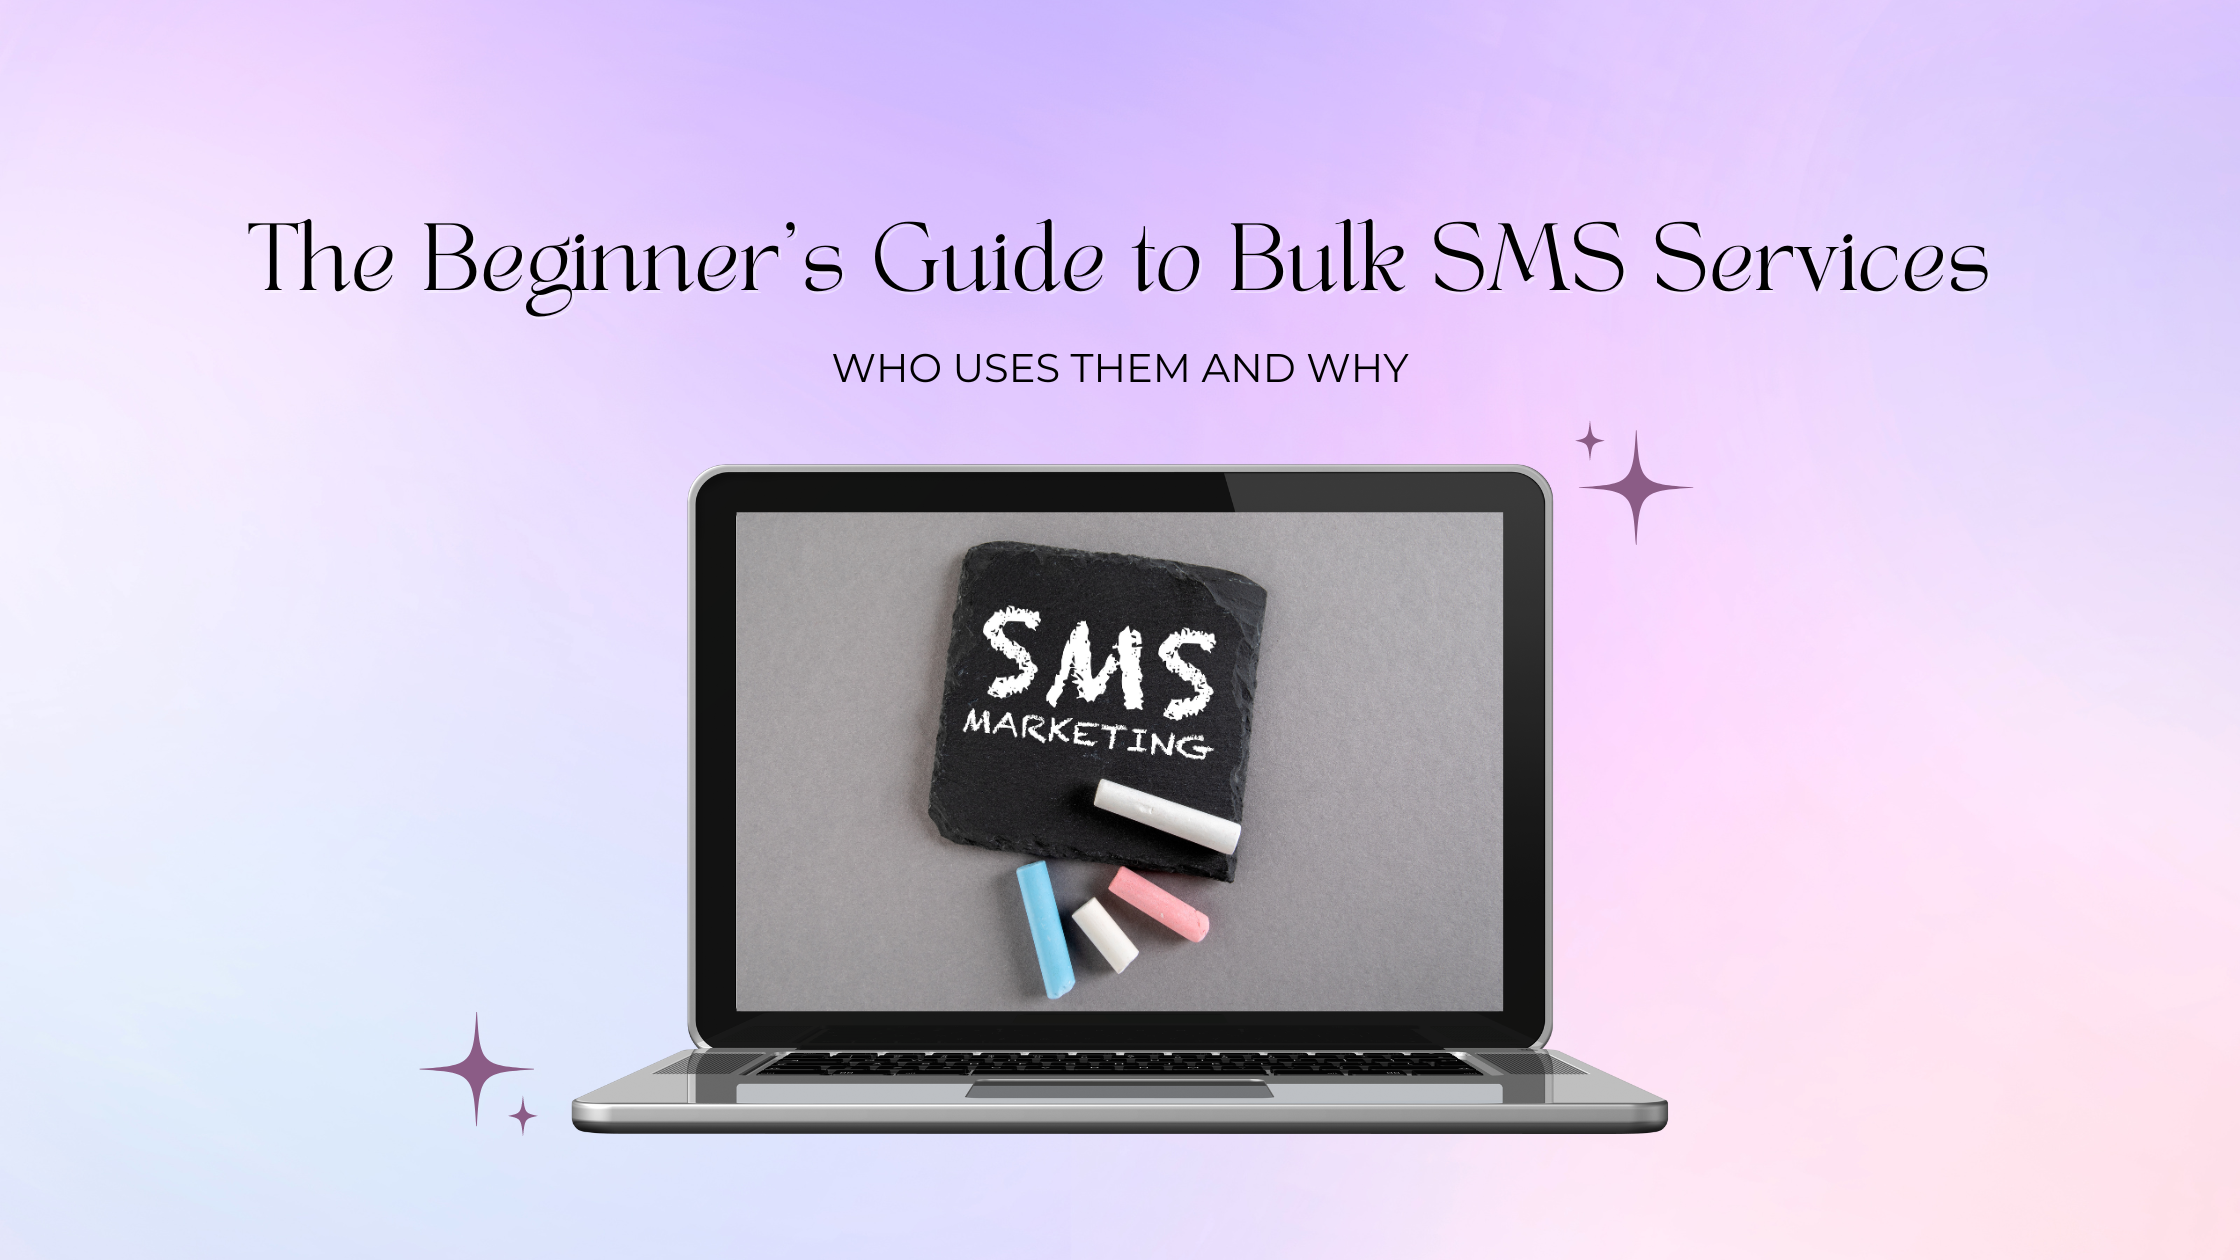 The Beginner's Guide to Bulk SMS Services: Who Uses Them and Why